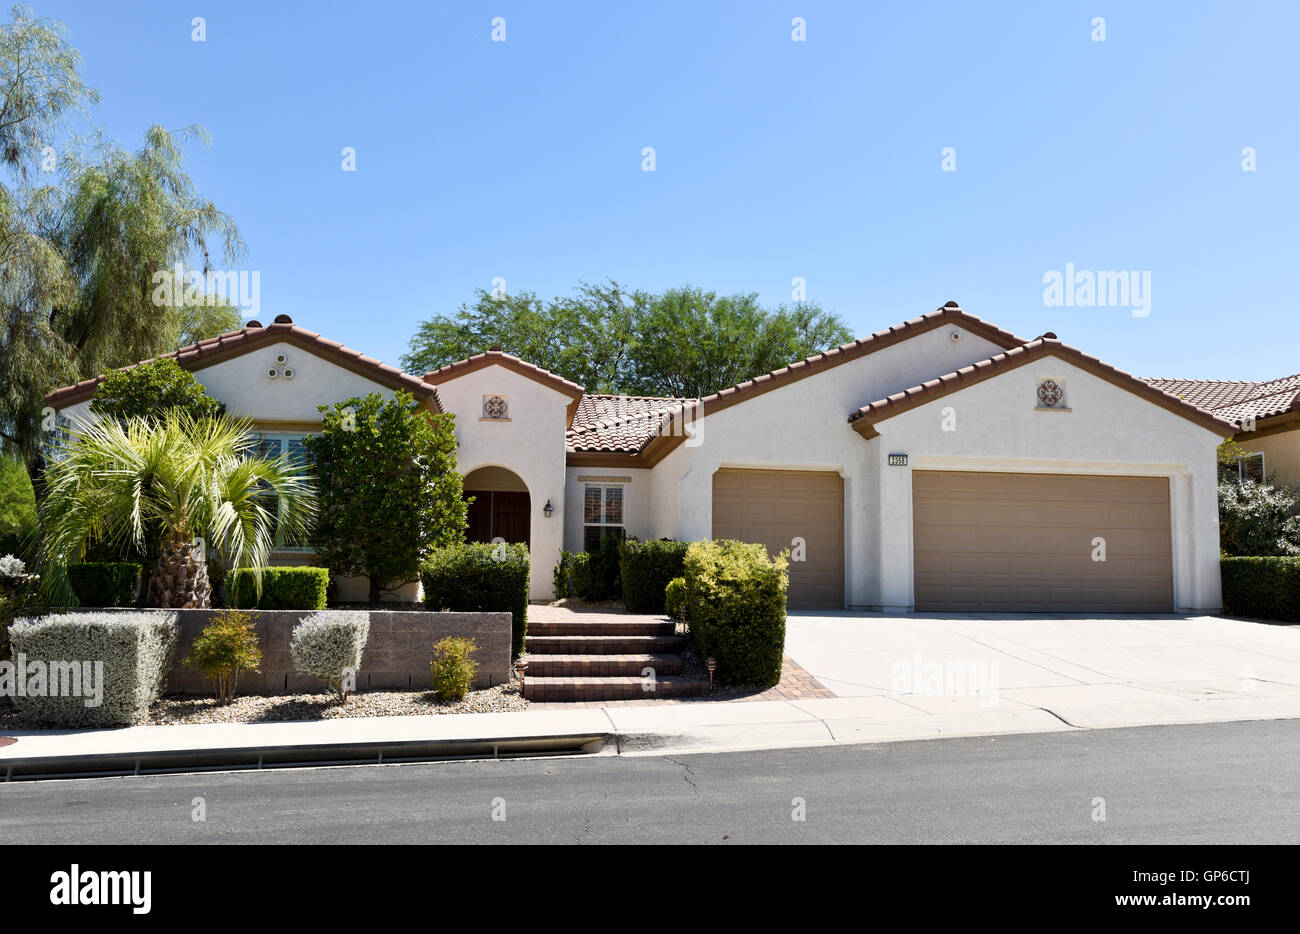 Southwestern US contemporary home exterior, front view Stock Photo